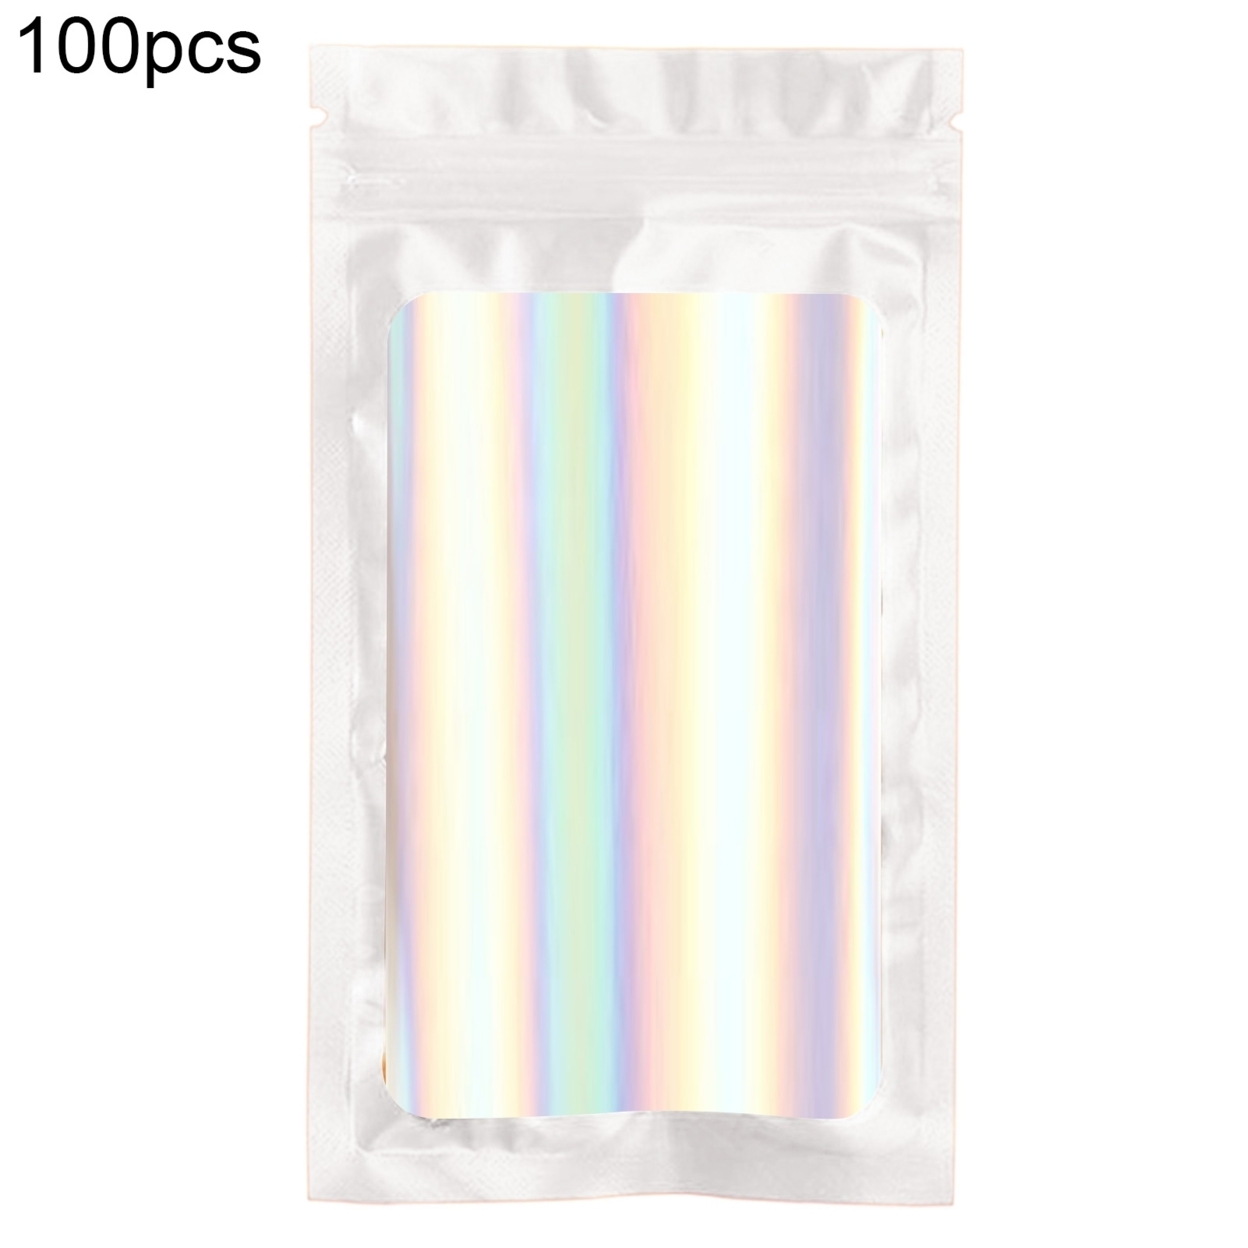 100Pcs/Set Zip-lock Bags Eye-catching Odor Proof Holographic Color Cosmetic Laser Packaging Bags for Kitchen - white, 10*18cm